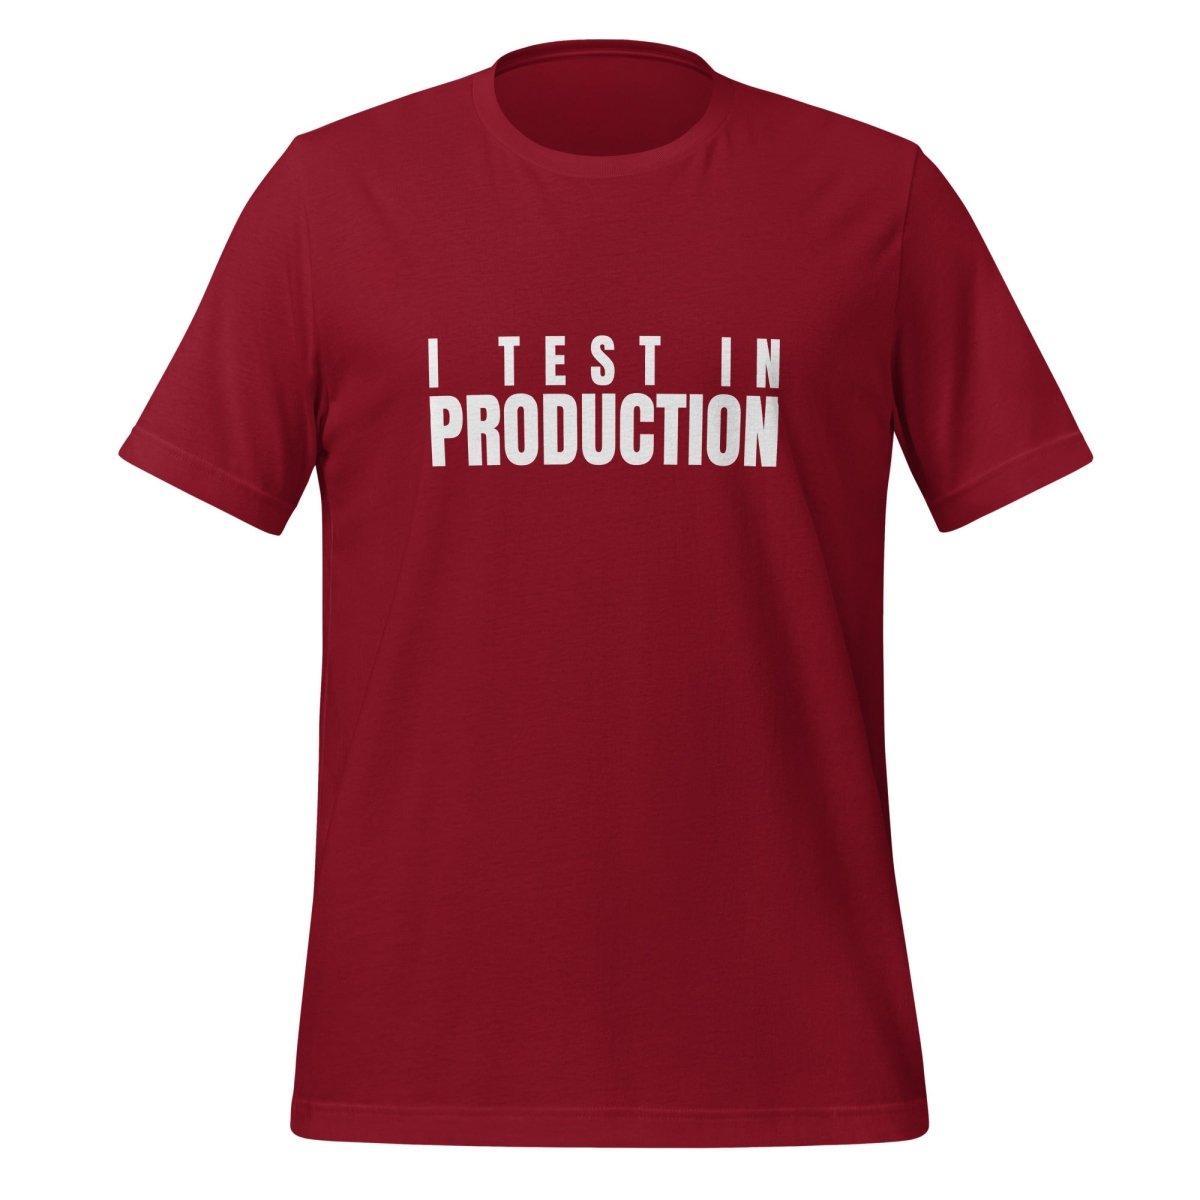 I Test in Production T - Shirt (unisex) - Cardinal - AI Store